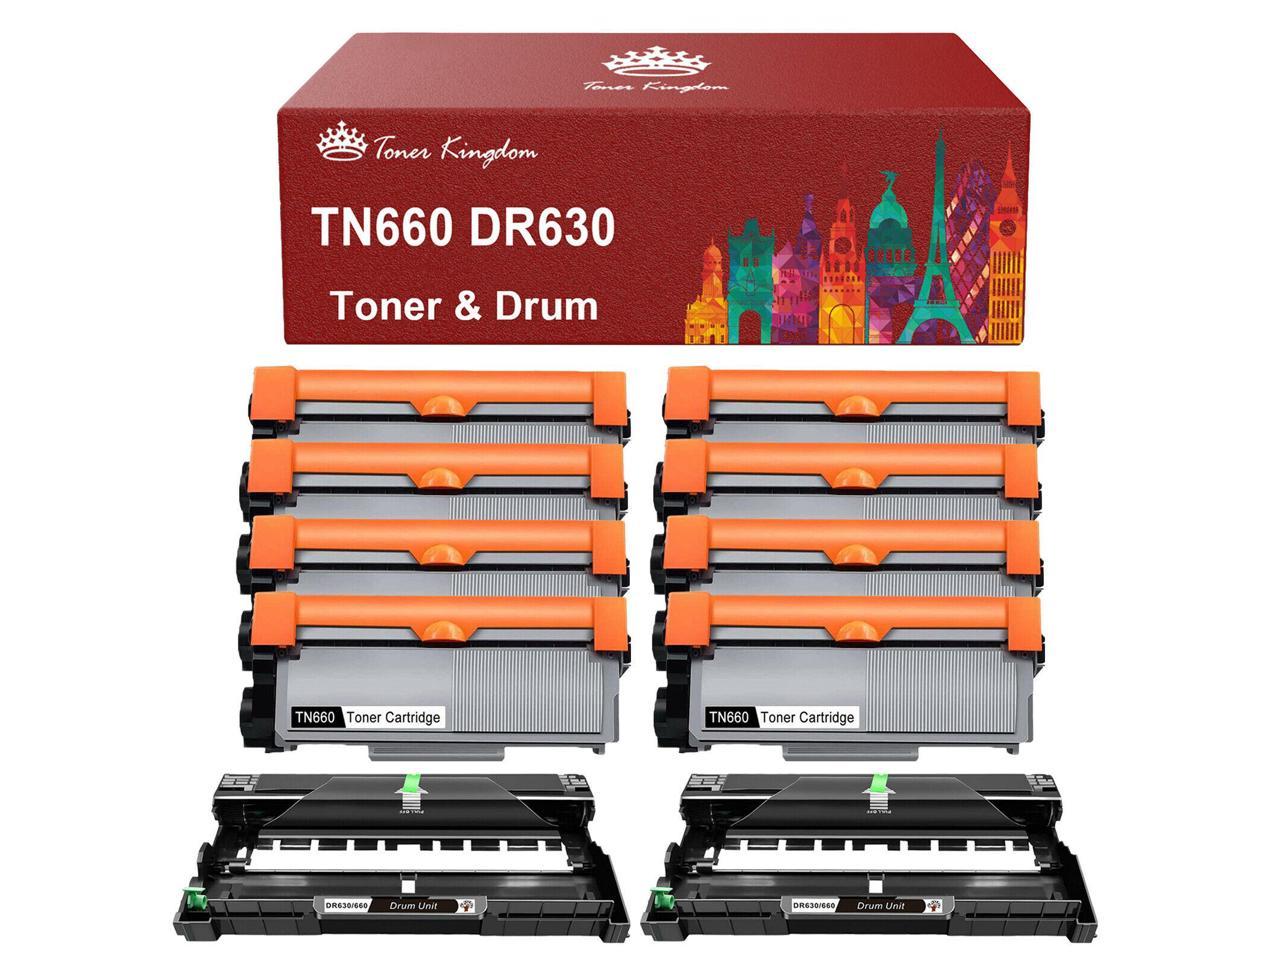 4P Brother TN660 Toner High Yield 2P DR630 Drum For Brother HL-L2380DW L2340DW 